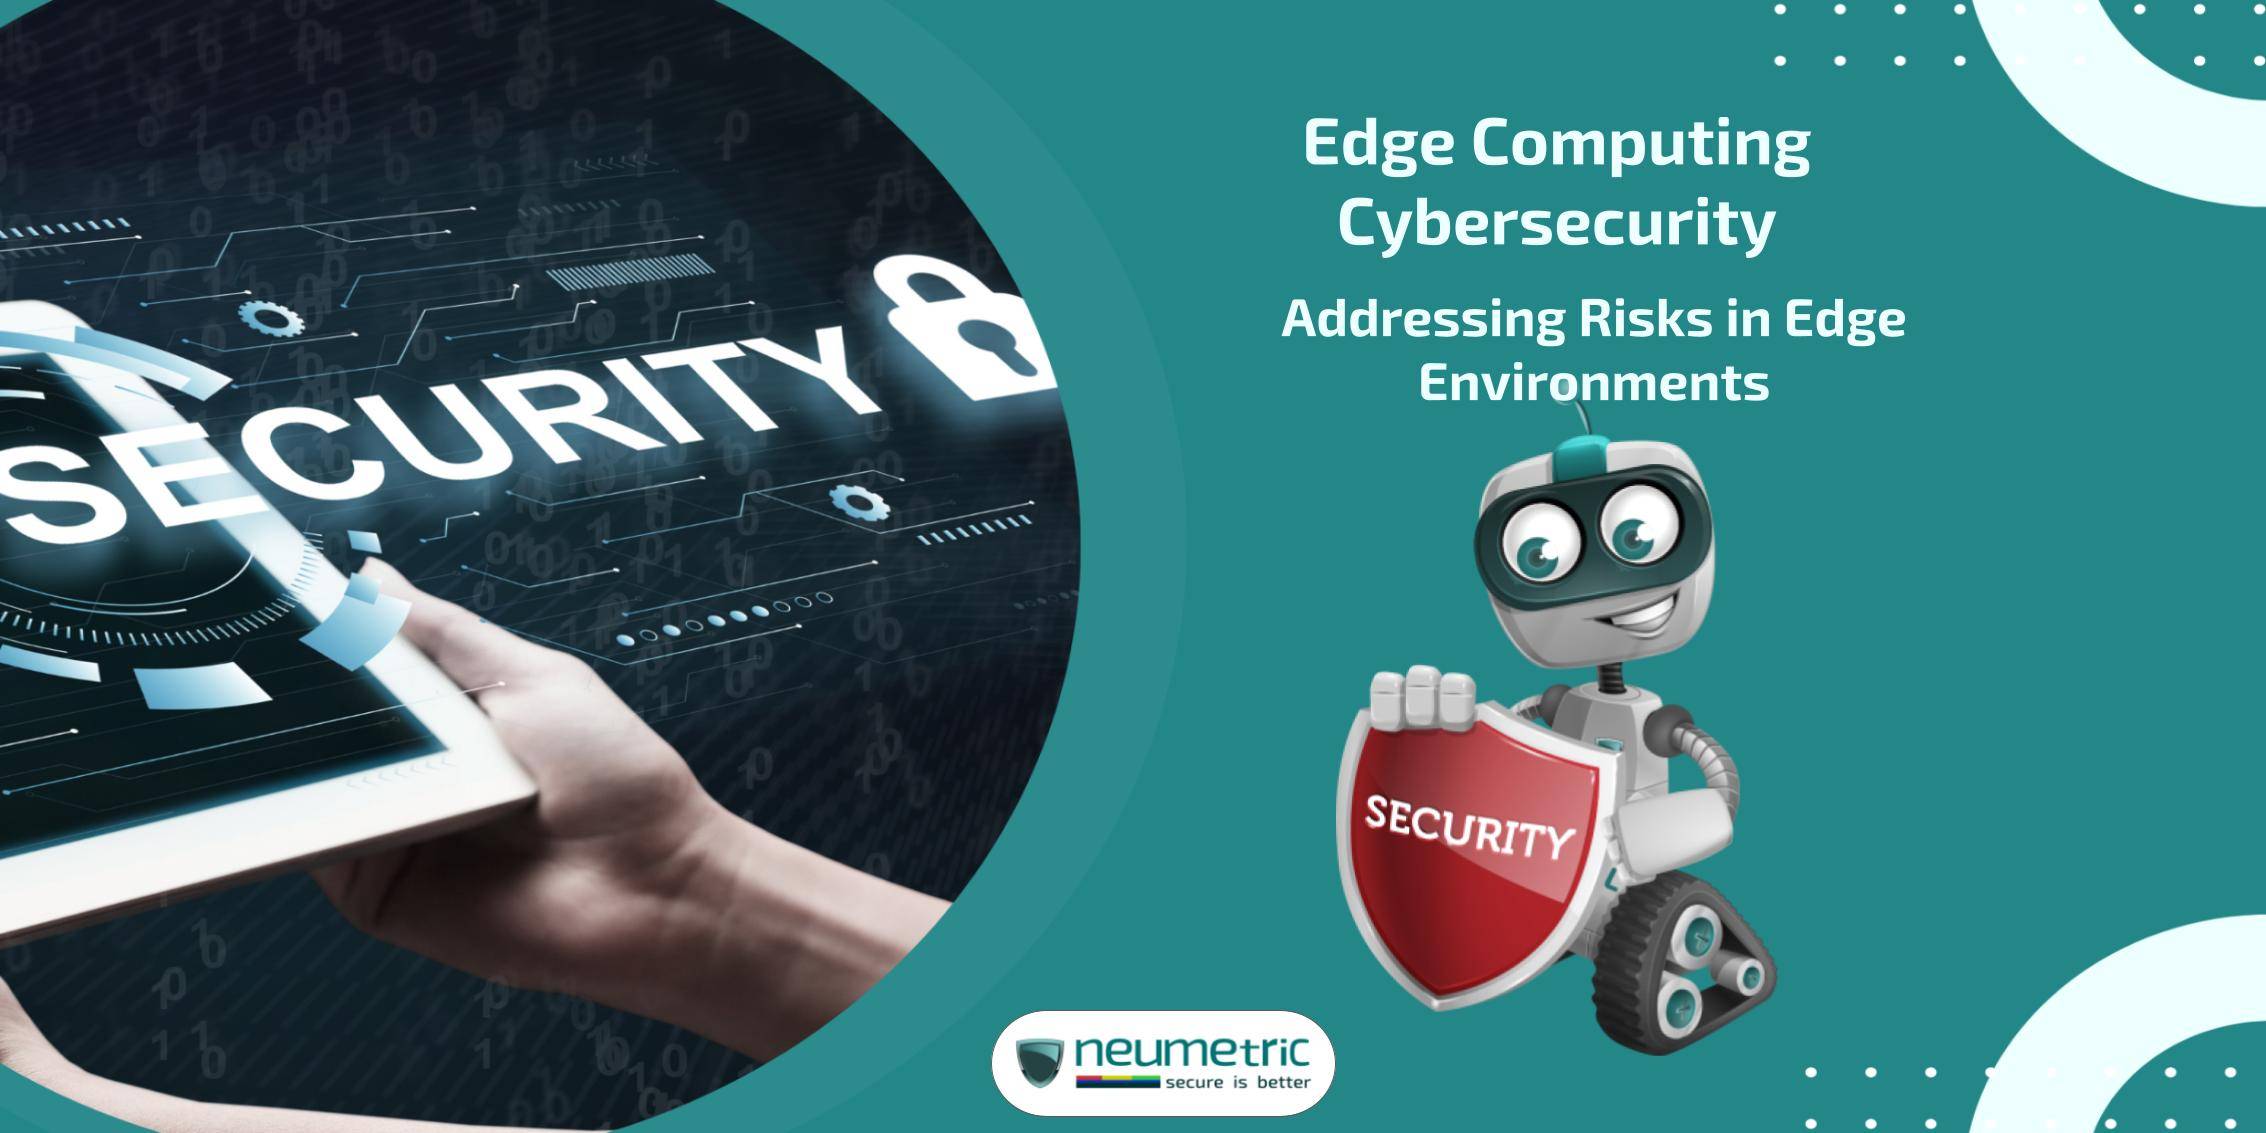 Edge Computing Cybersecurity: Addressing Risks in Edge Environments